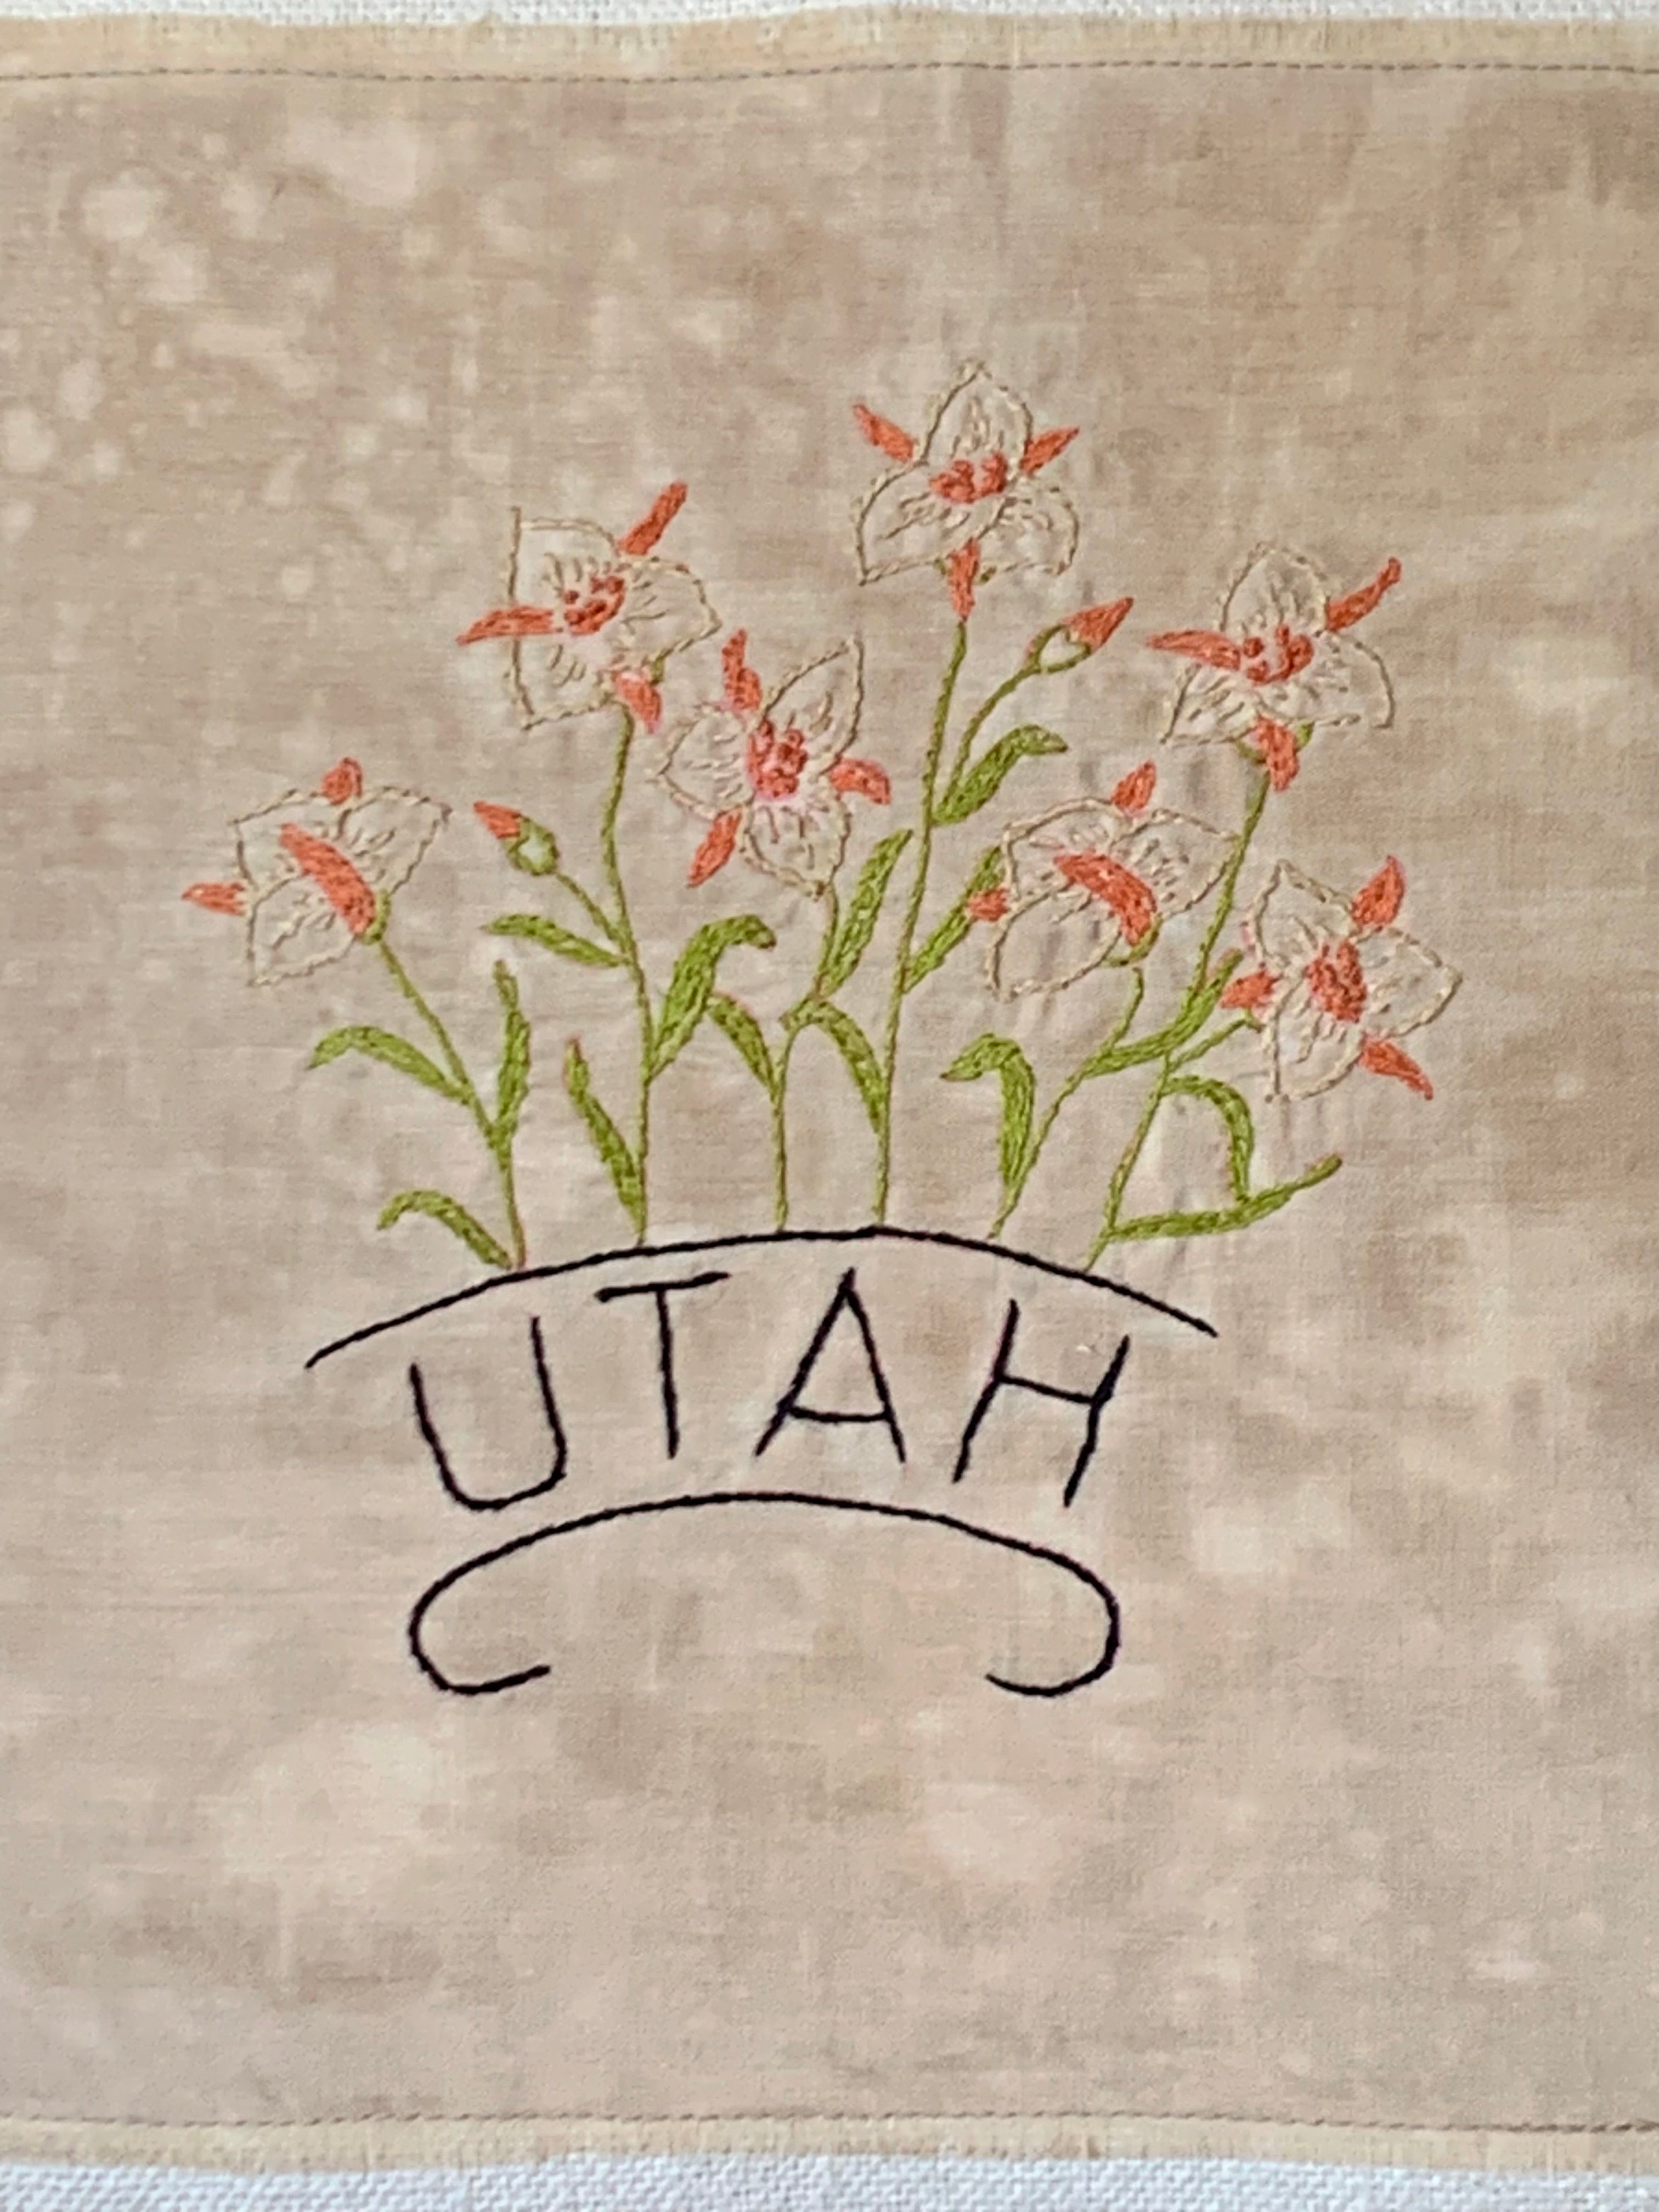 Utah State Pillow - Embroidered